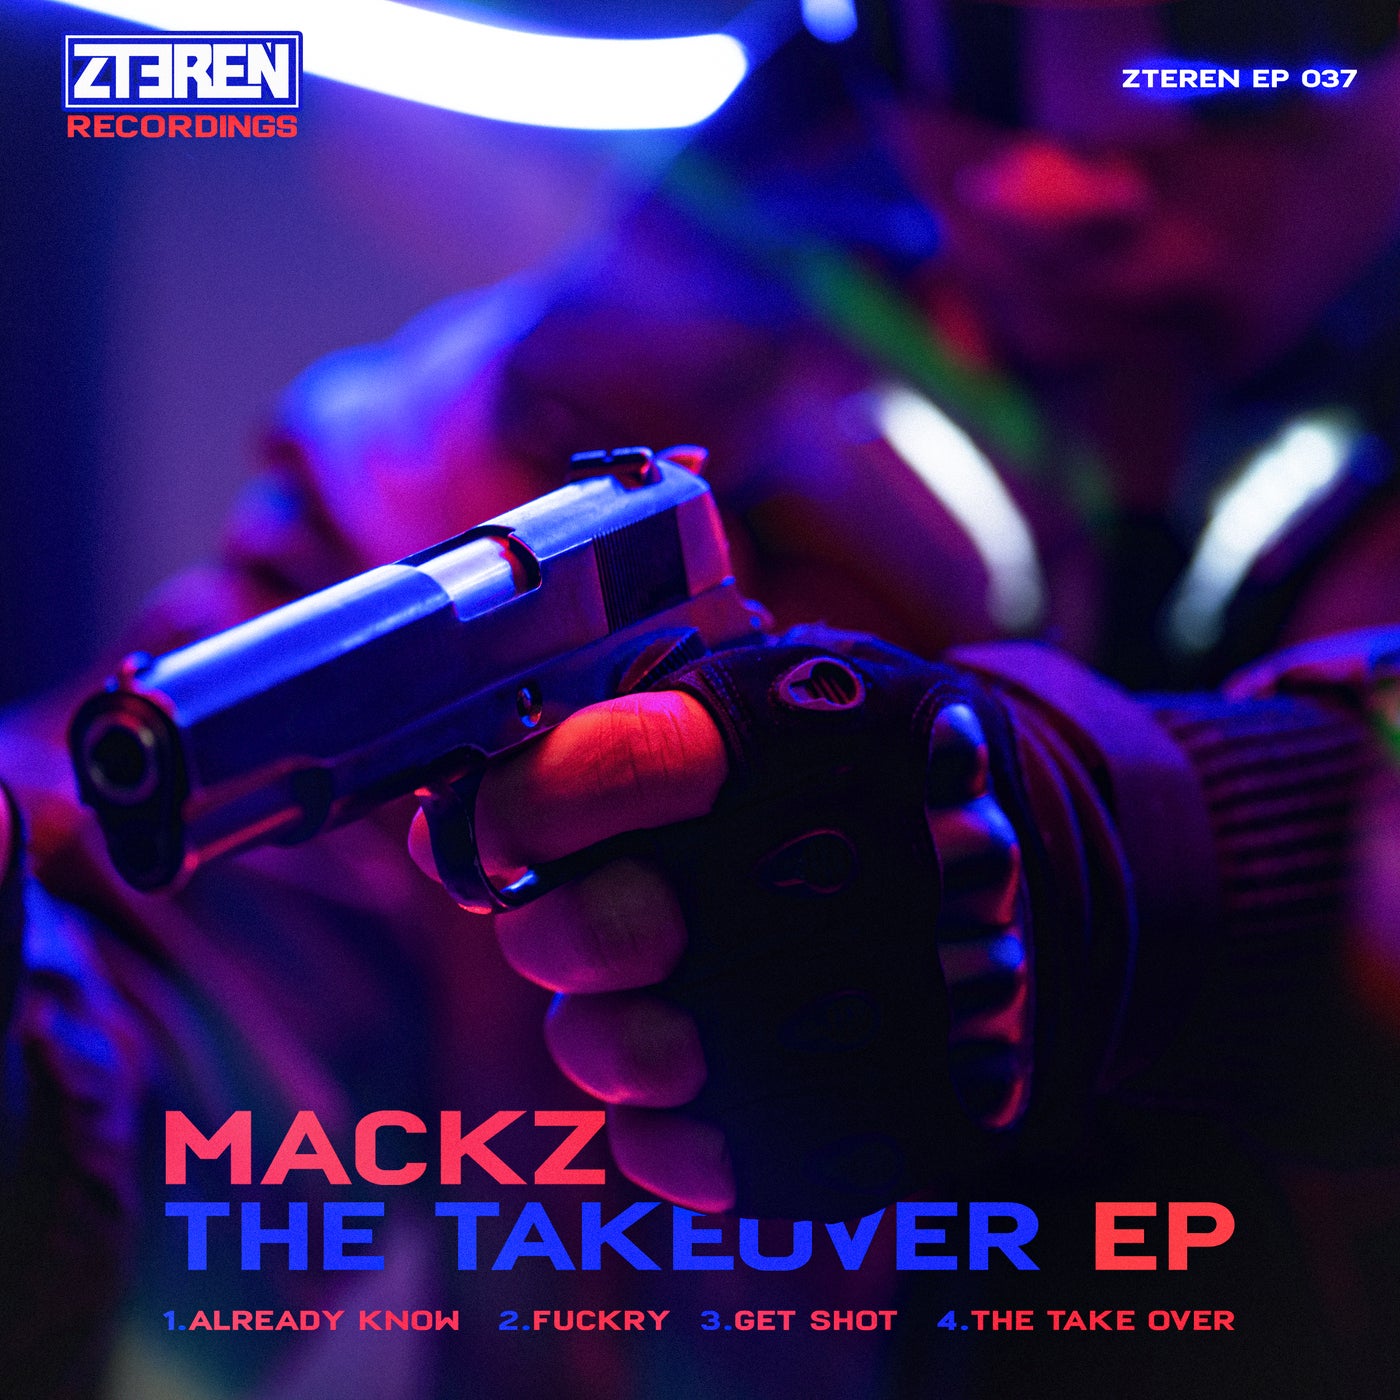 The Takeover EP